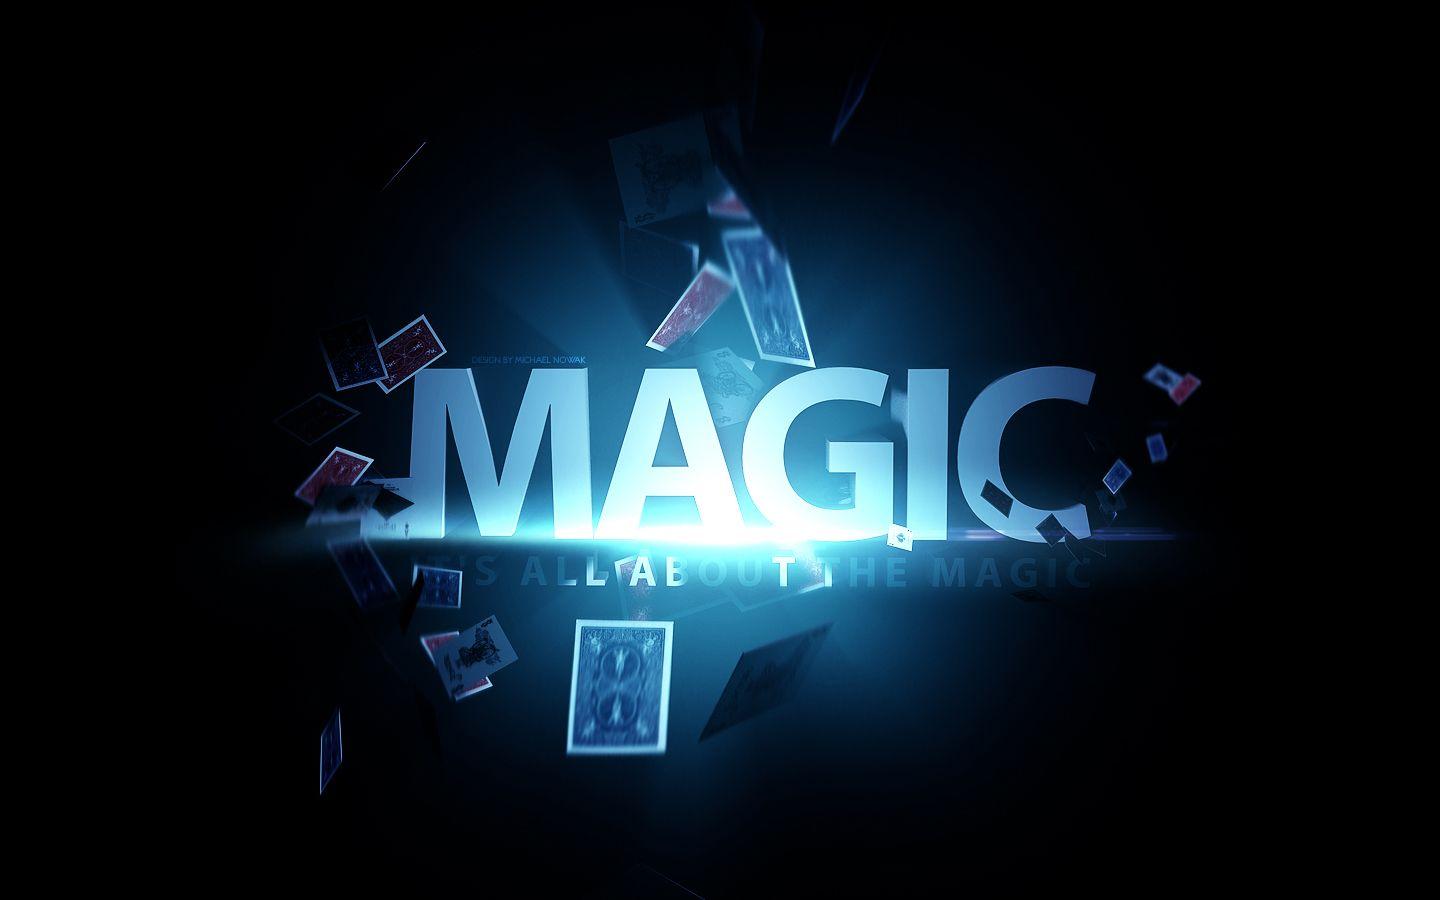 Magician HD Wallpaper Background For Free Download, BsnSCB